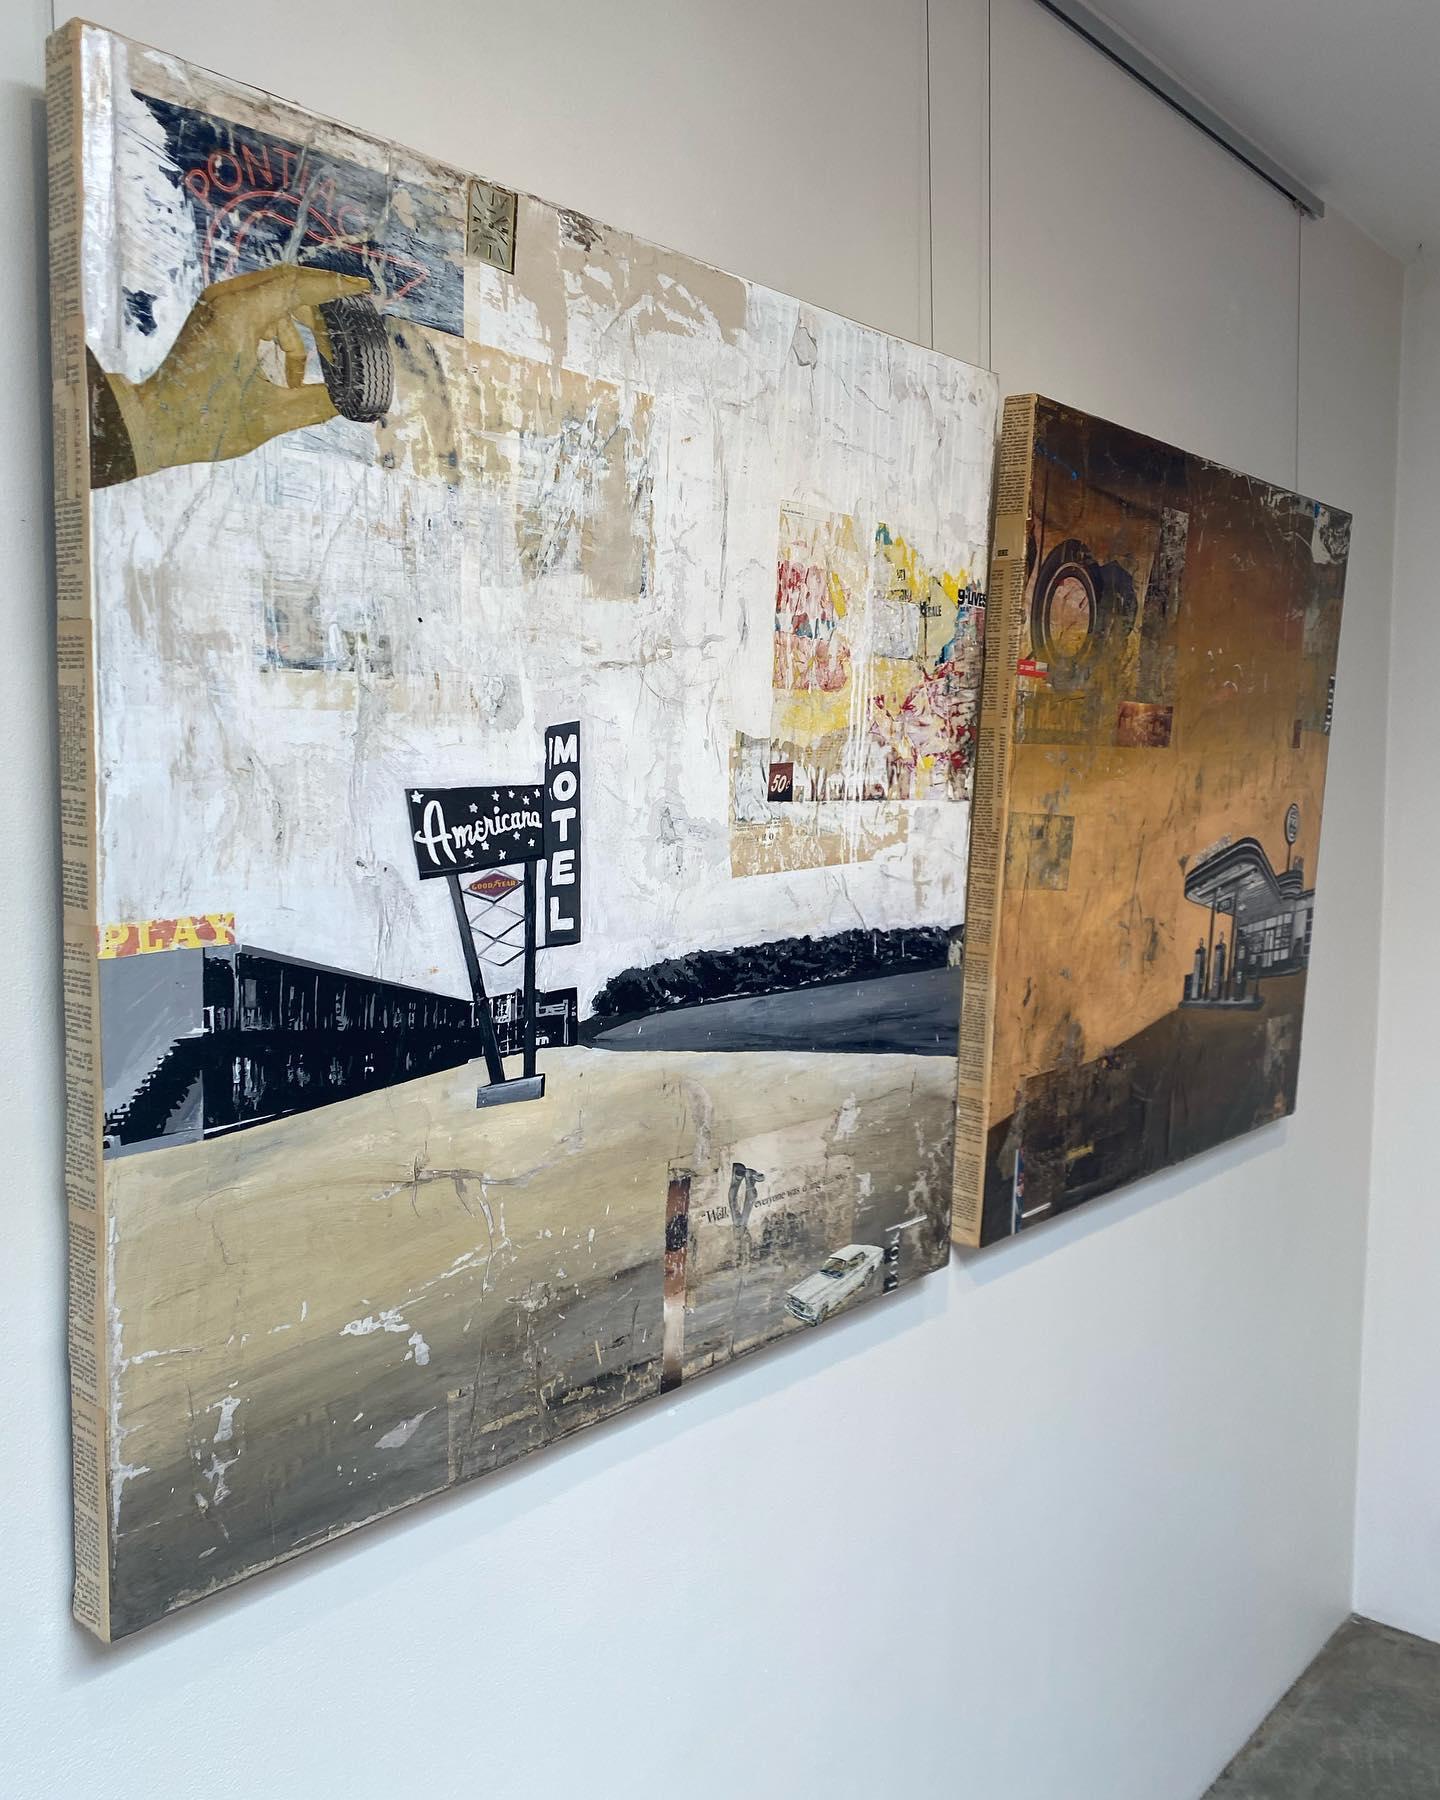 GREG MILLER
American Play Diptych, 2021
Acrylic, Collage on Panel
36 x 36 in. each  36 x 72 in. overall

Drawing from the diverse cultural and geographic makeup of his Californian roots, Greg Miller explores his relationship with the space he